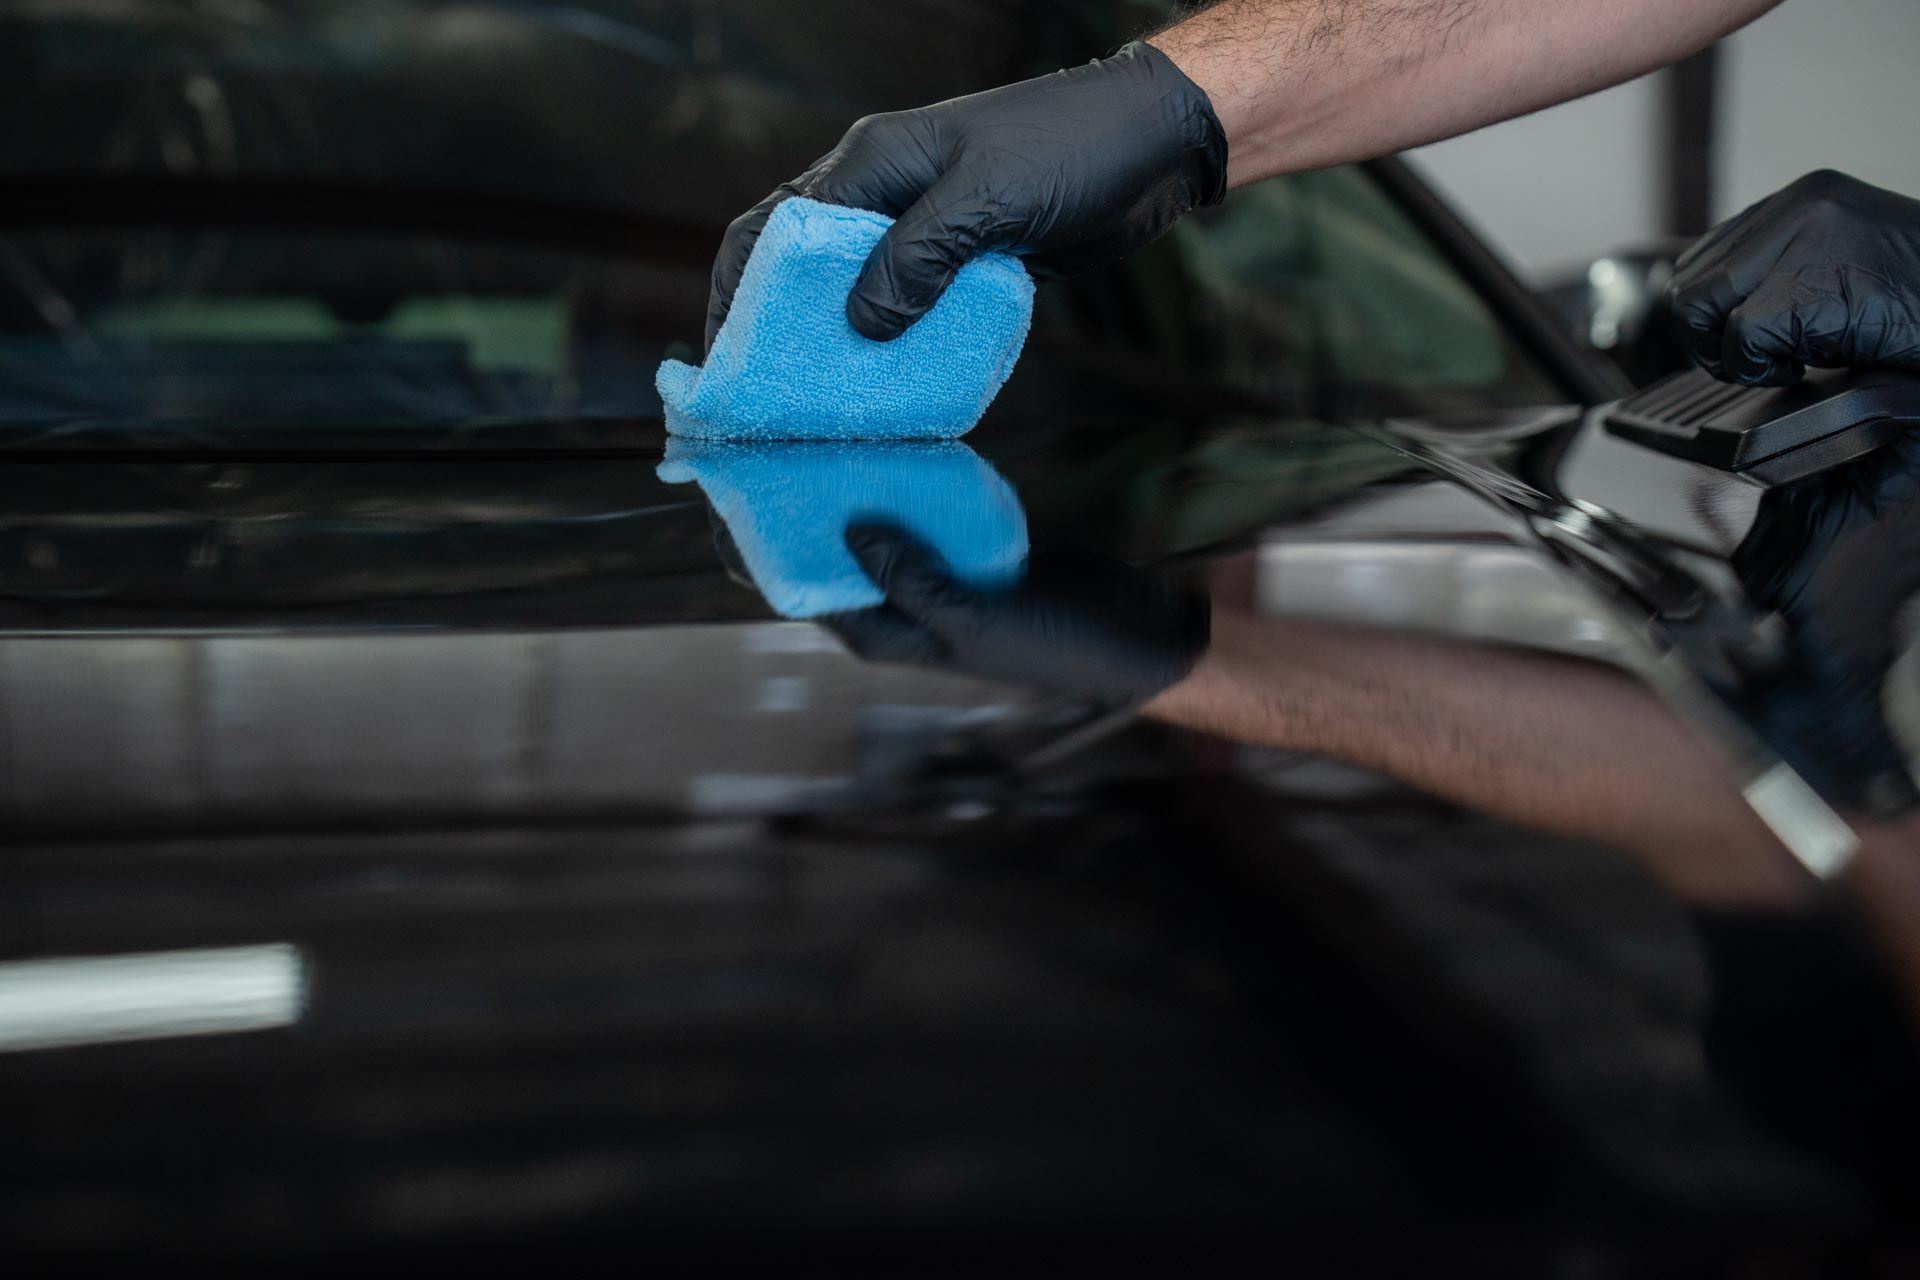 Ceramic Coating - A person is cleaning the hood of a car with a blue sponge.